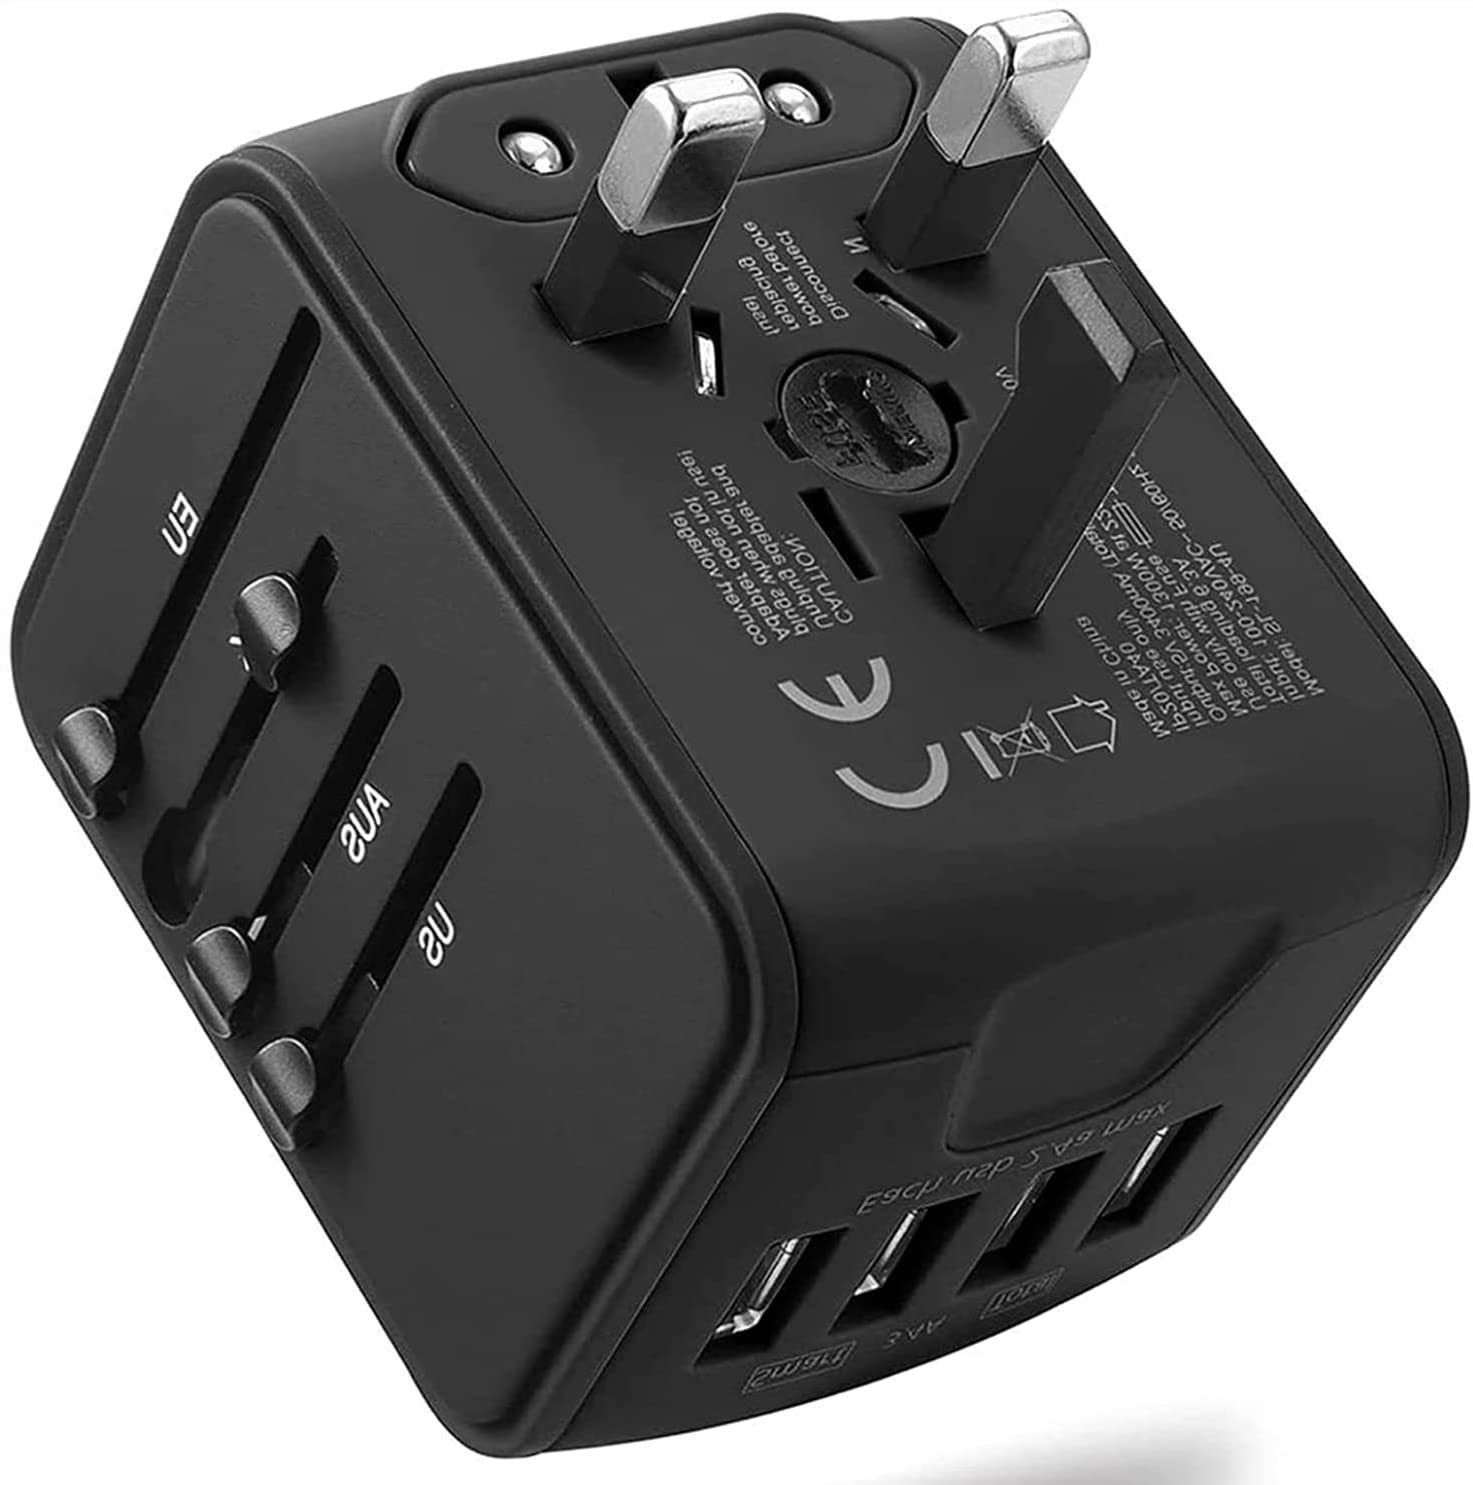 The Essential Travel Companion: All You Need to Know About Universal Travel Adapters